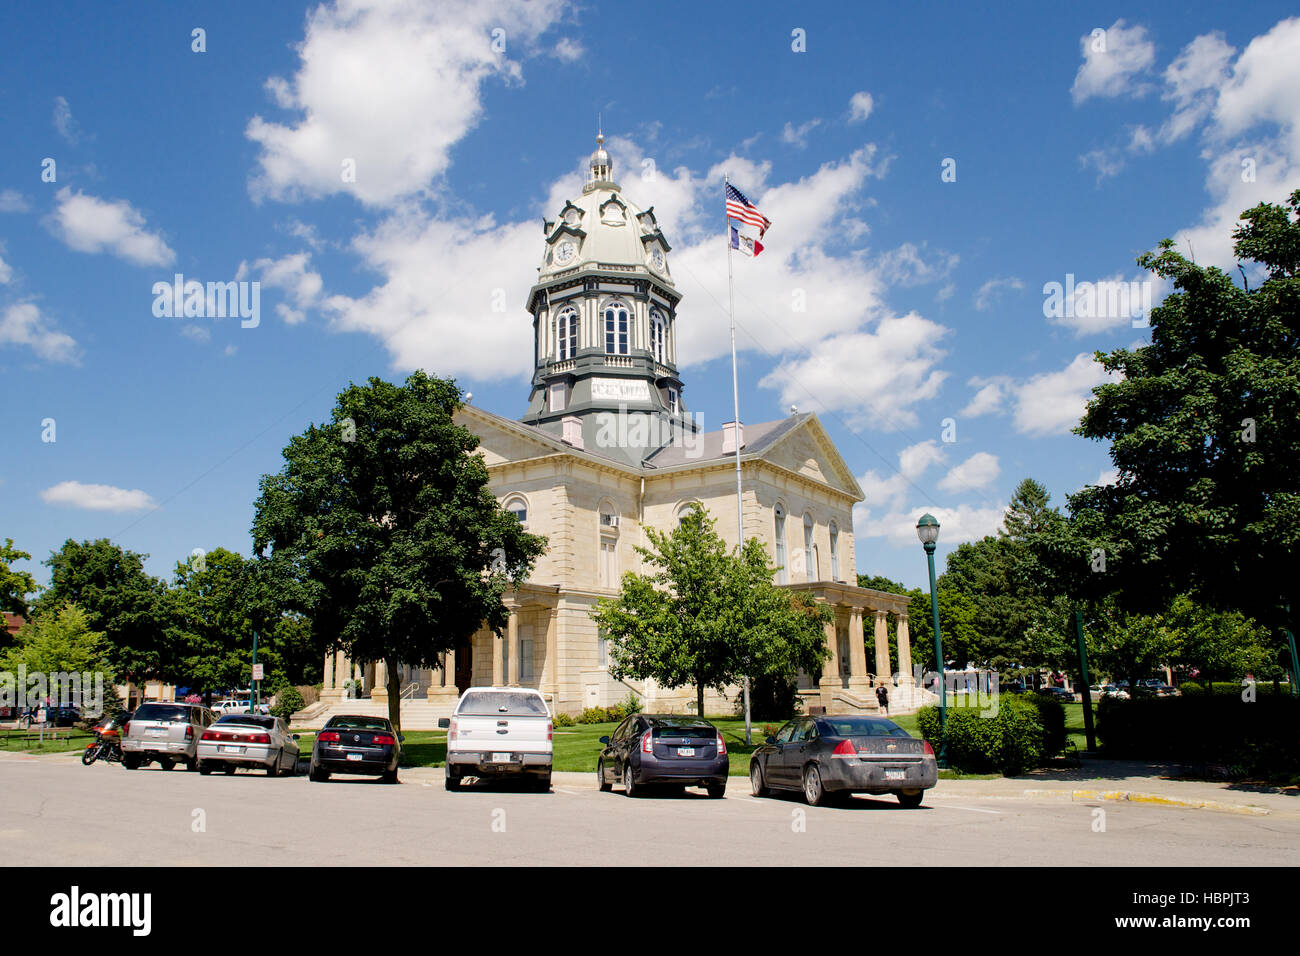 https://c8.alamy.com/comp/HBPJT3/madison-county-courthouse-in-winterset-madison-county-iowa-usa-HBPJT3.jpg